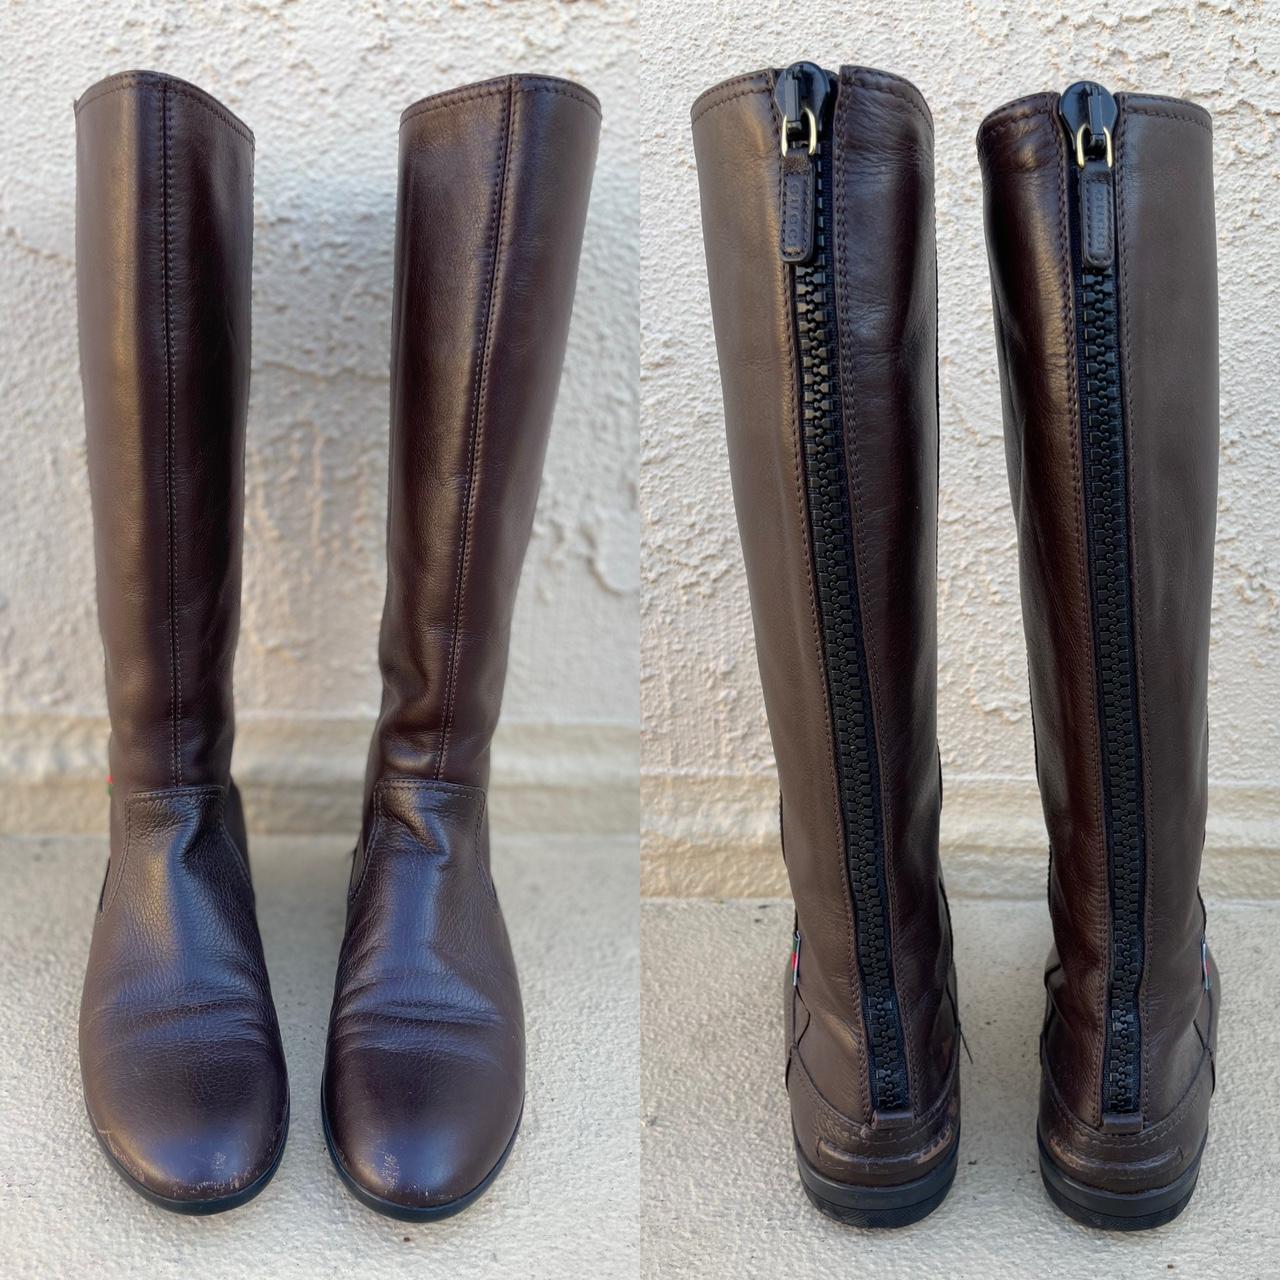 Gucci - Authenticated Boots - Leather Brown Plain for Women, Good Condition